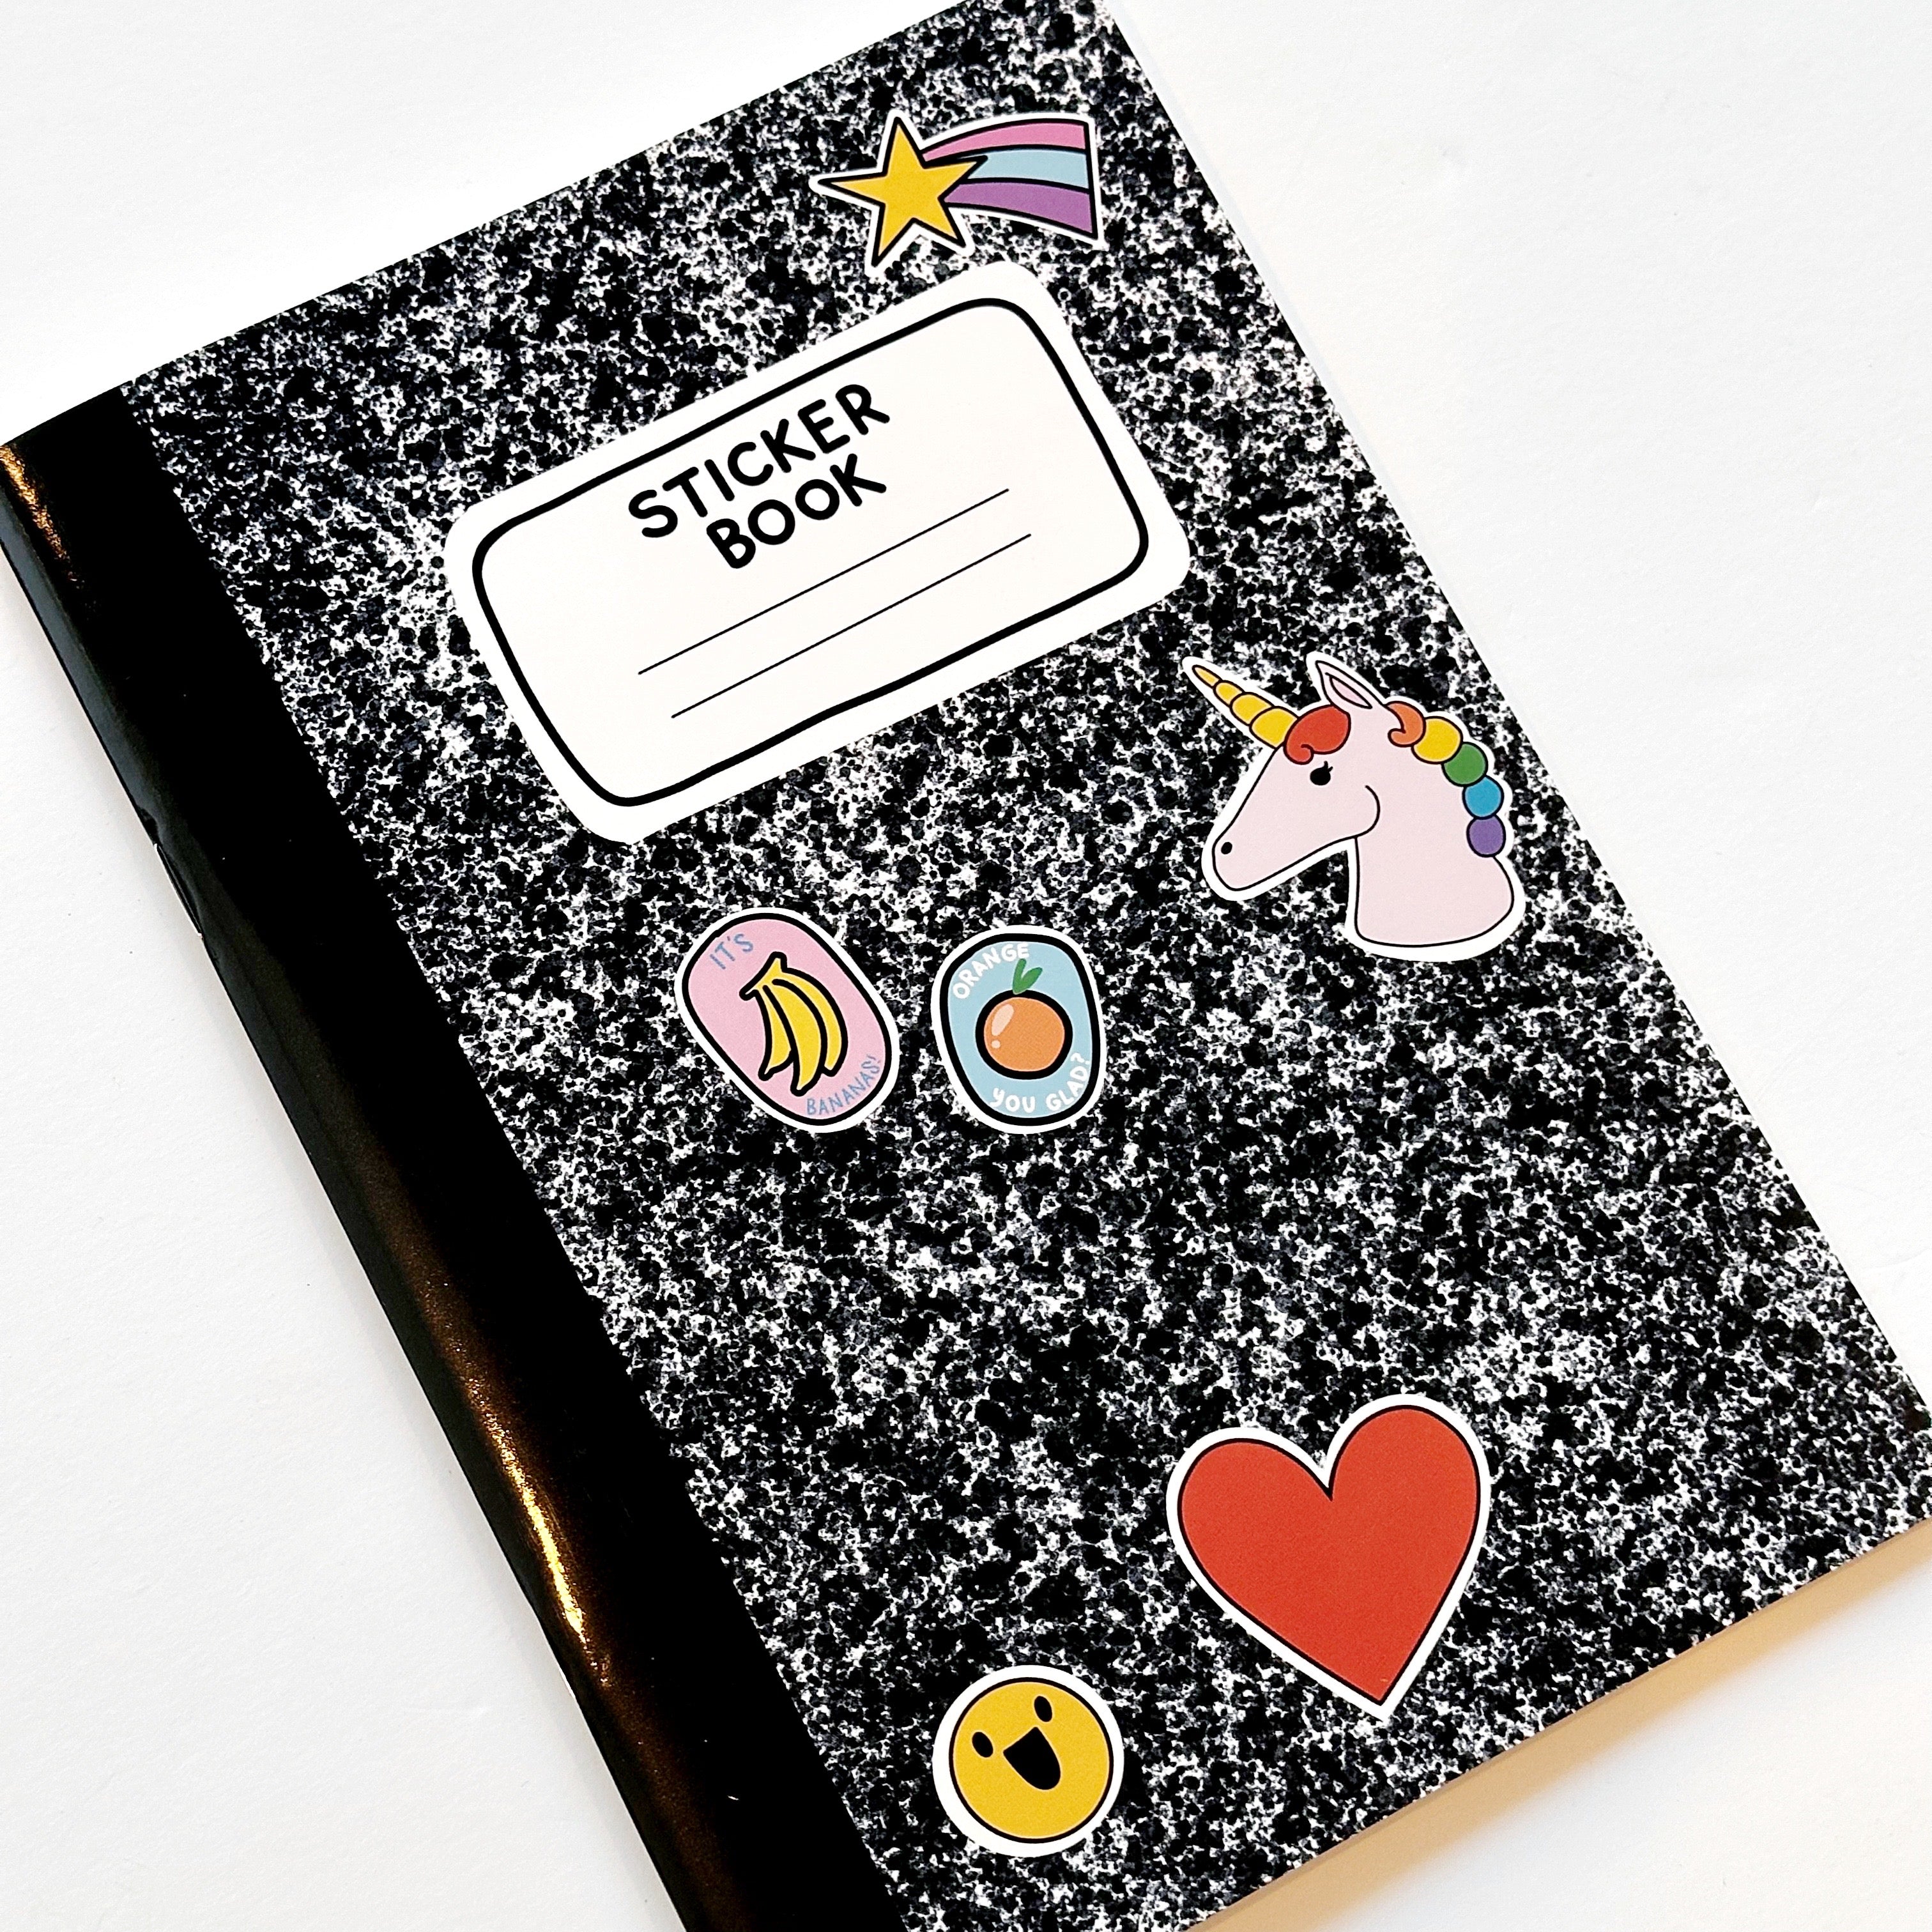 mage of black and white composition notebook as a sticker book with images of stickers on the front including a unicorn, heart, smiley face, orange and bananas with black text on white field says, "Sticker book" with lines for adding name."